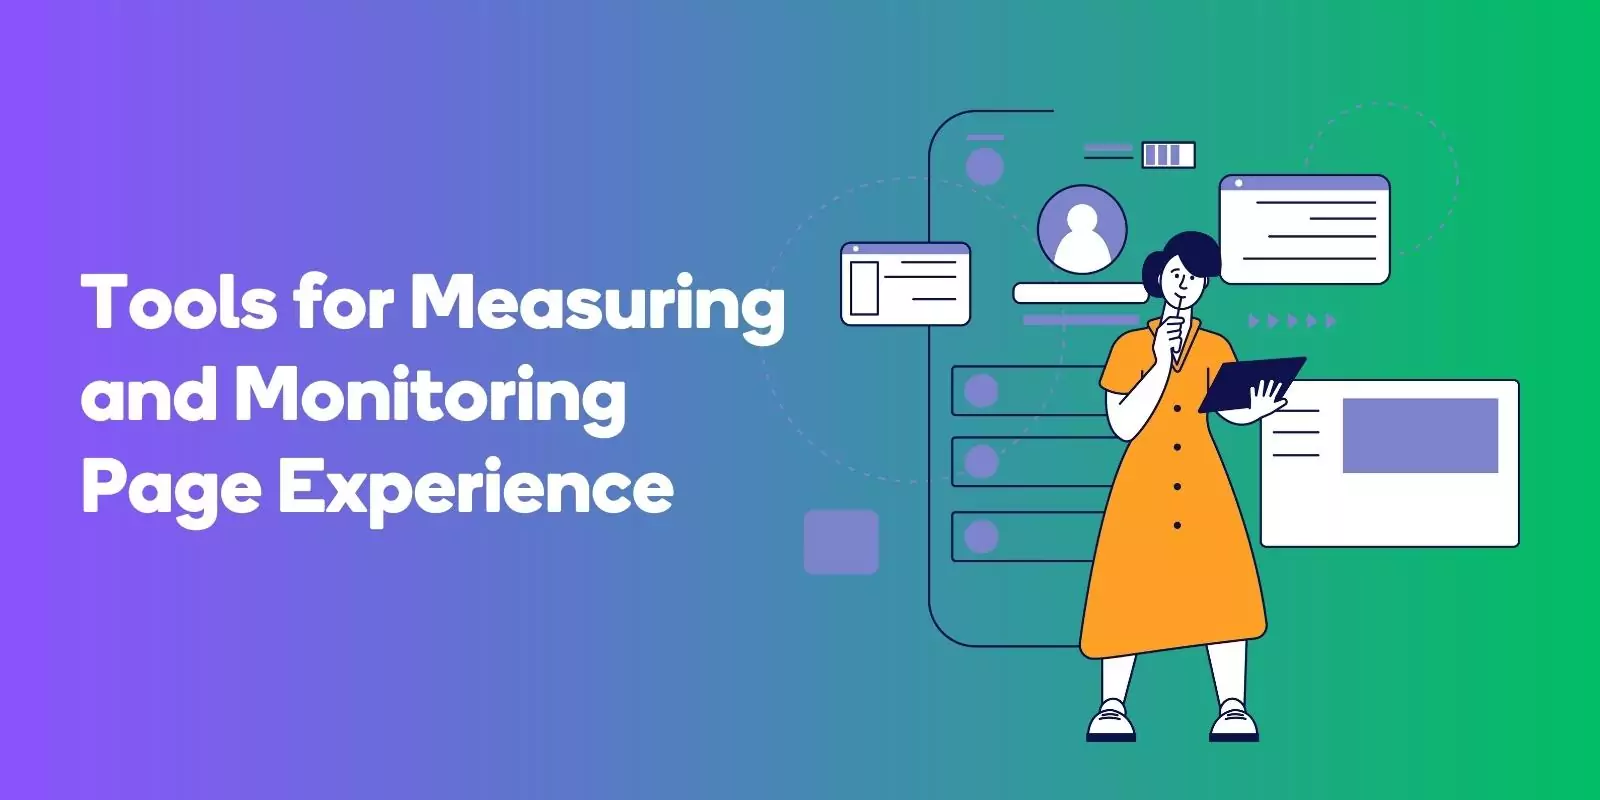 Tools for Measuring and Monitoring Page Experience